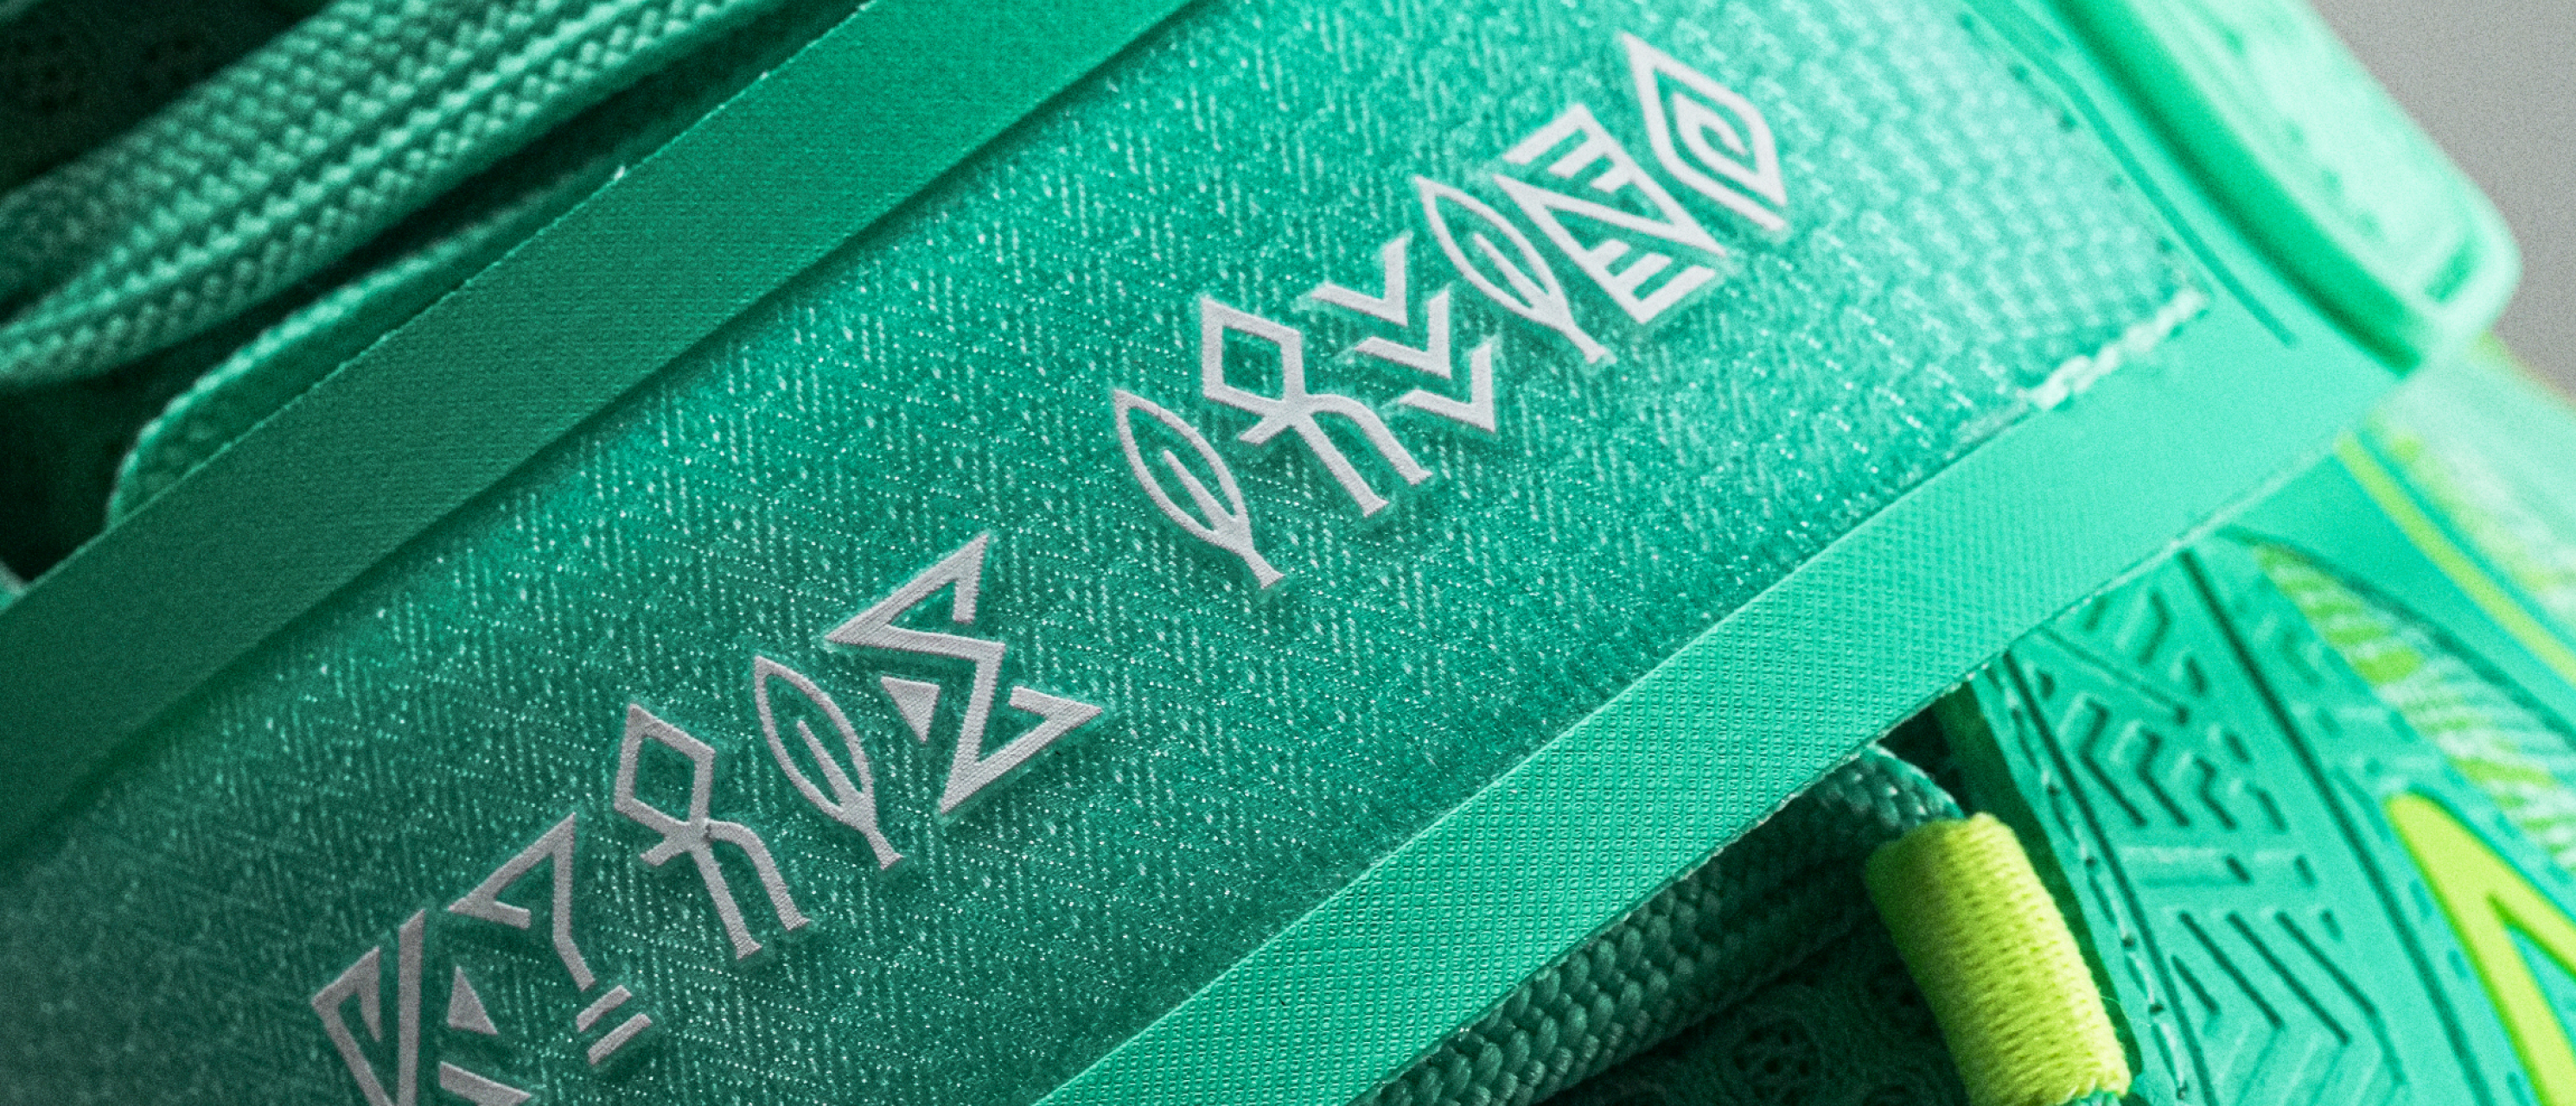 ANTA KAI 1 Green Grails Basketball Shoes by Kyire Irving